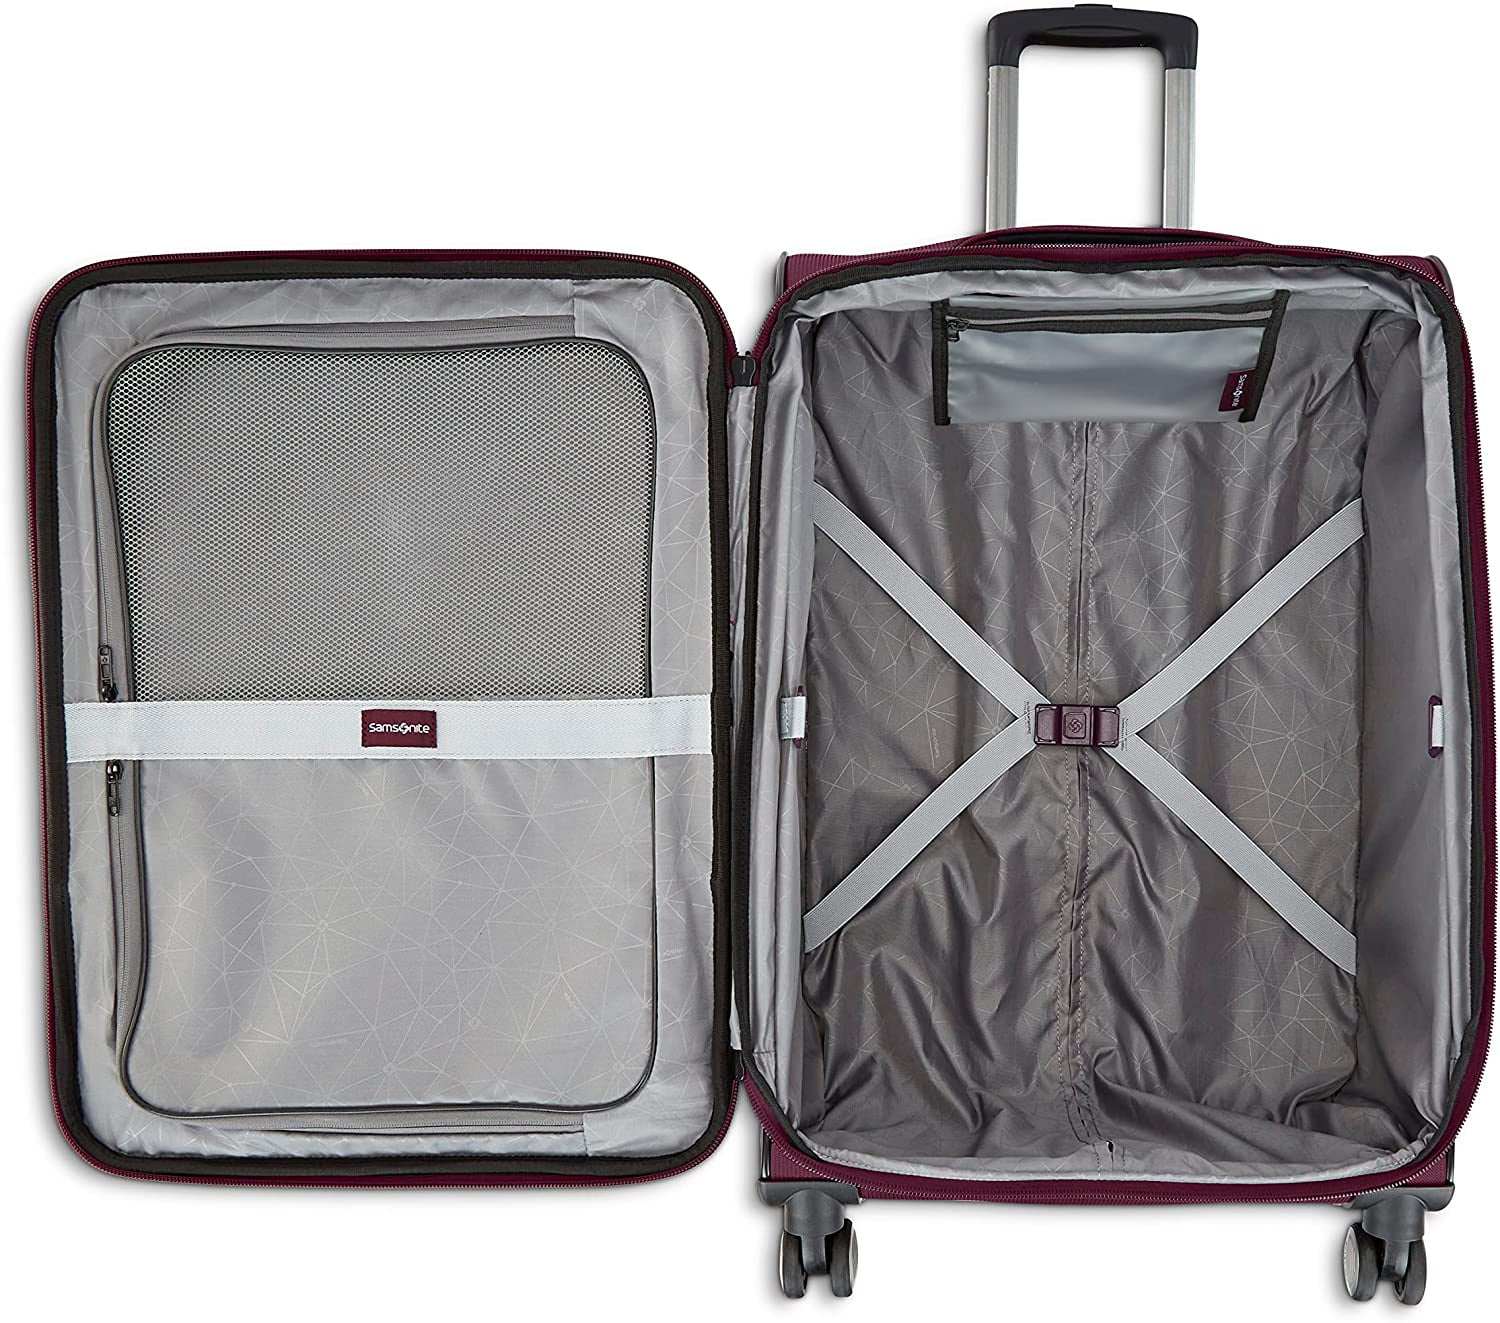 Samsonite Ascella 3.0 Softside Expandable Luggage with Spinner